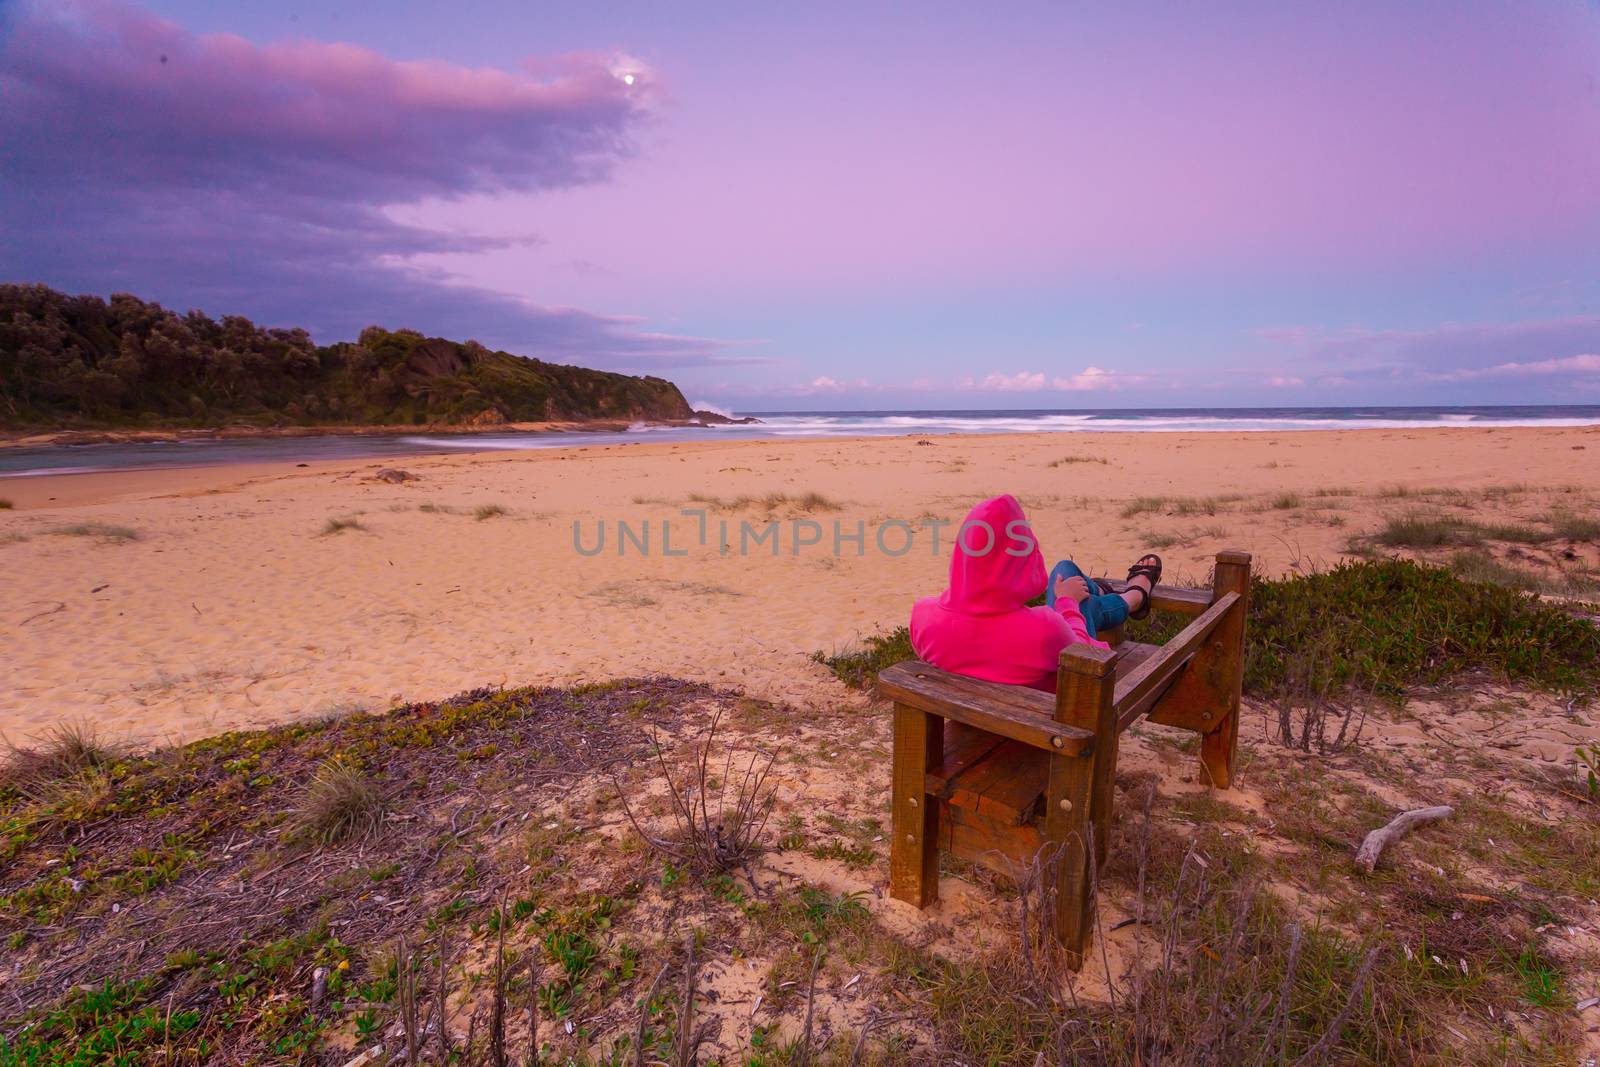 Woman relaxes on bench overlooking beach in the afternoon dusk by lovleah